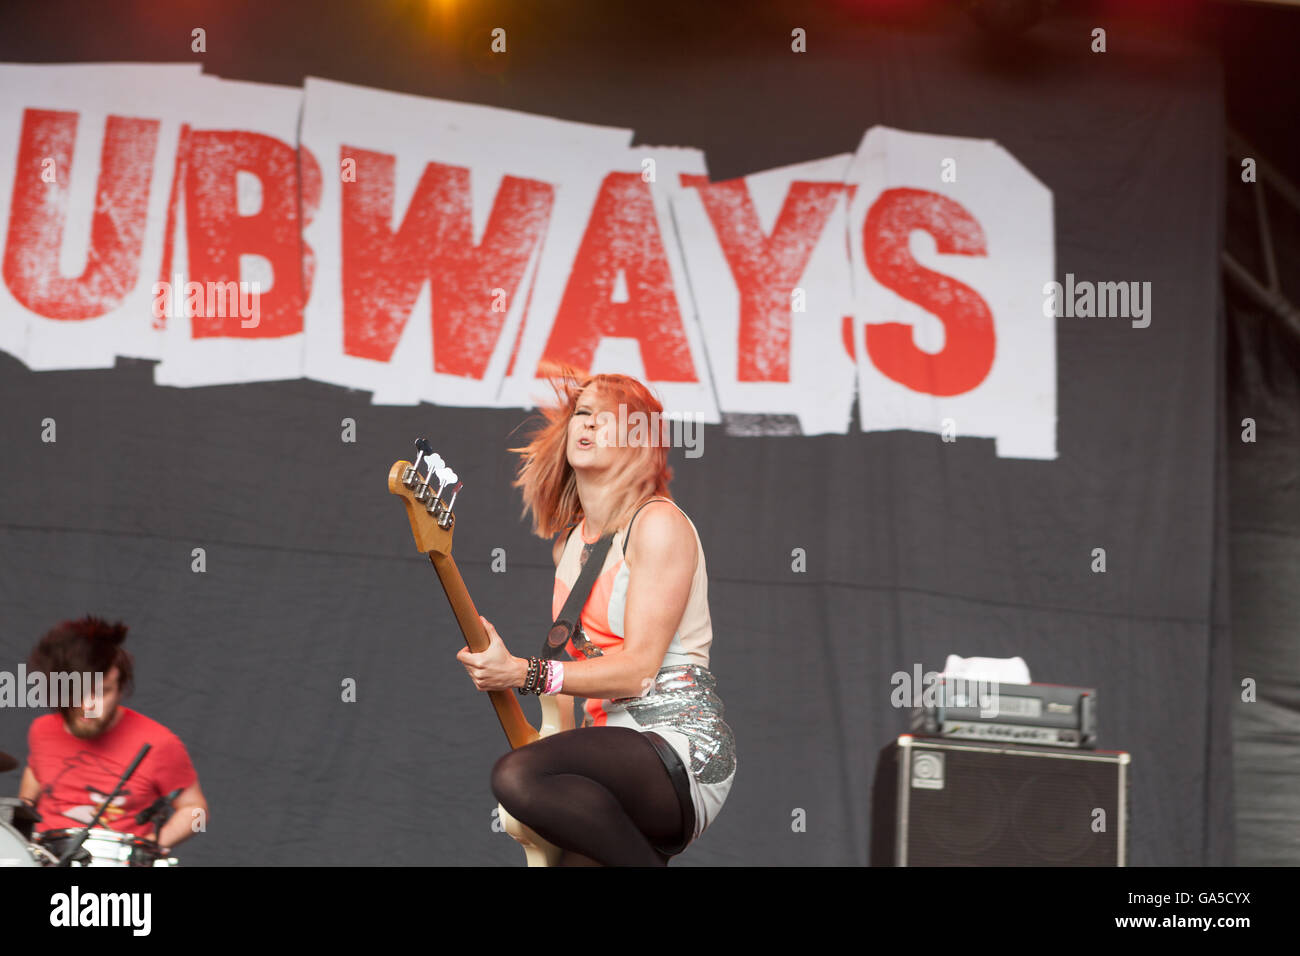 Coventry, West Midlands, UK. 2nd July, 2016. Herfordshire band The Subways perform on stage at Coventrys free festival 'Godiva', July 2016. The subweays are a trio from Hertfordshire who have achieved success with their alternative / rock band Credit:  Paul Hastie/Alamy Live News Stock Photo